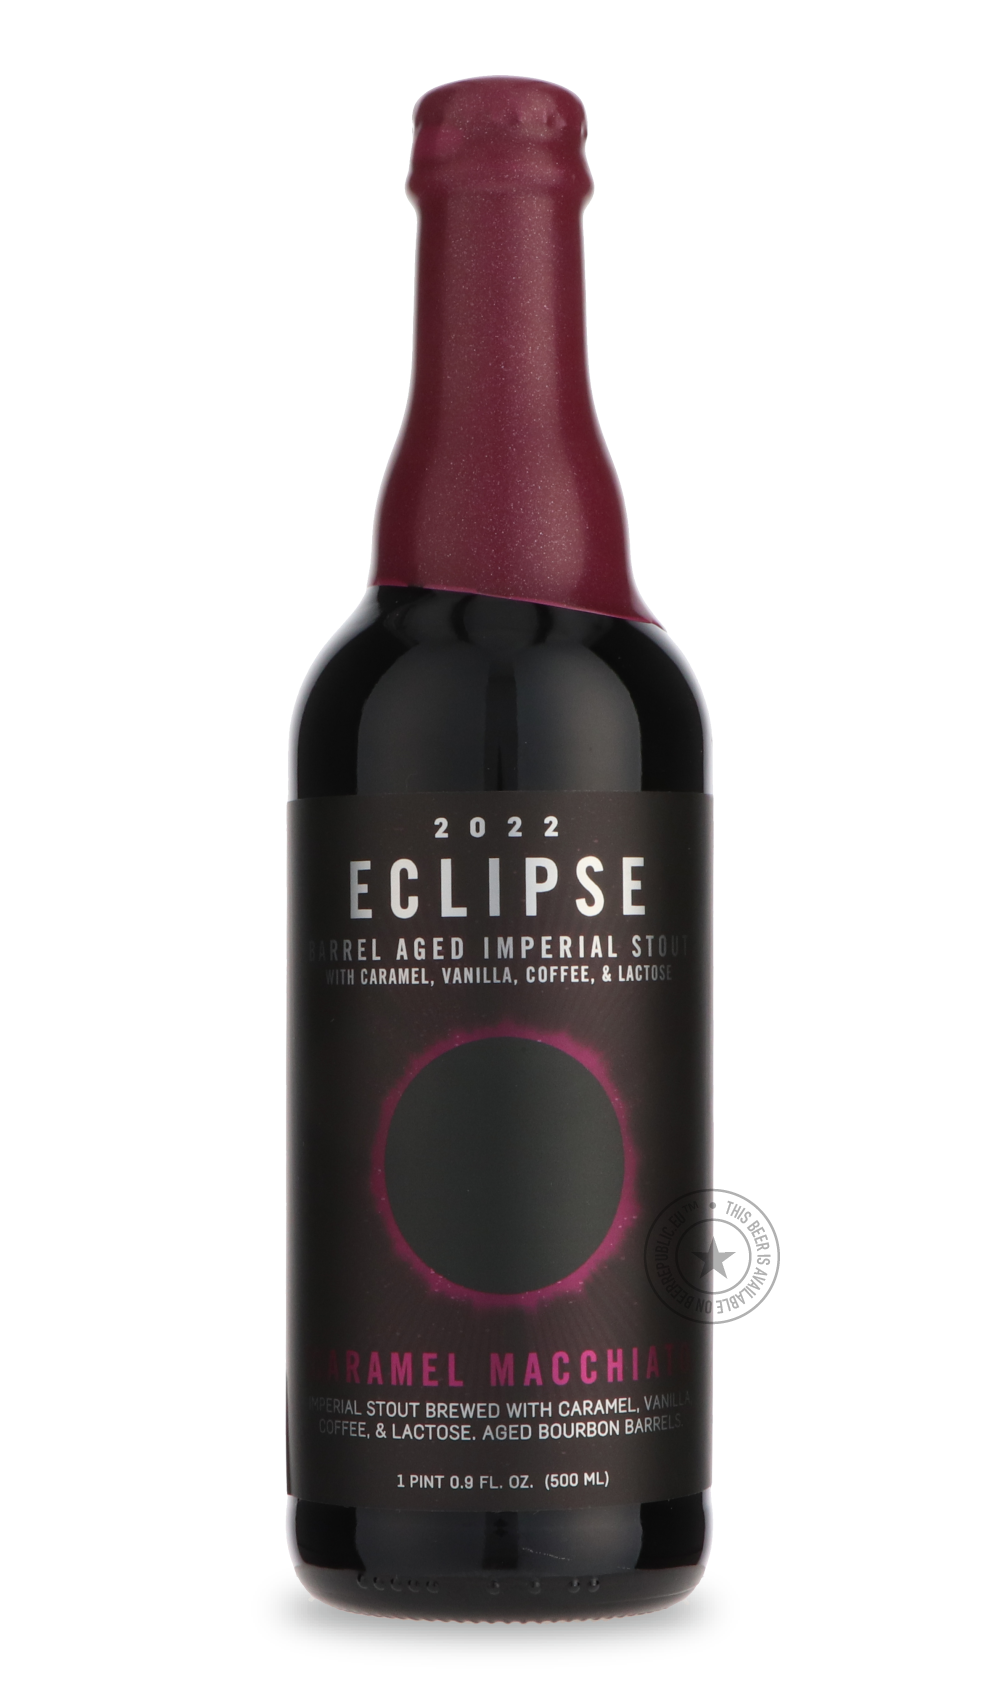 -FiftyFifty- Eclipse - Caramel Macchiato (2022)-Stout & Porter- Only @ Beer Republic - The best online beer store for American & Canadian craft beer - Buy beer online from the USA and Canada - Bier online kopen - Amerikaans bier kopen - Craft beer store - Craft beer kopen - Amerikanisch bier kaufen - Bier online kaufen - Acheter biere online - IPA - Stout - Porter - New England IPA - Hazy IPA - Imperial Stout - Barrel Aged - Barrel Aged Imperial Stout - Brown - Dark beer - Blond - Blonde - Pilsner - Lager -